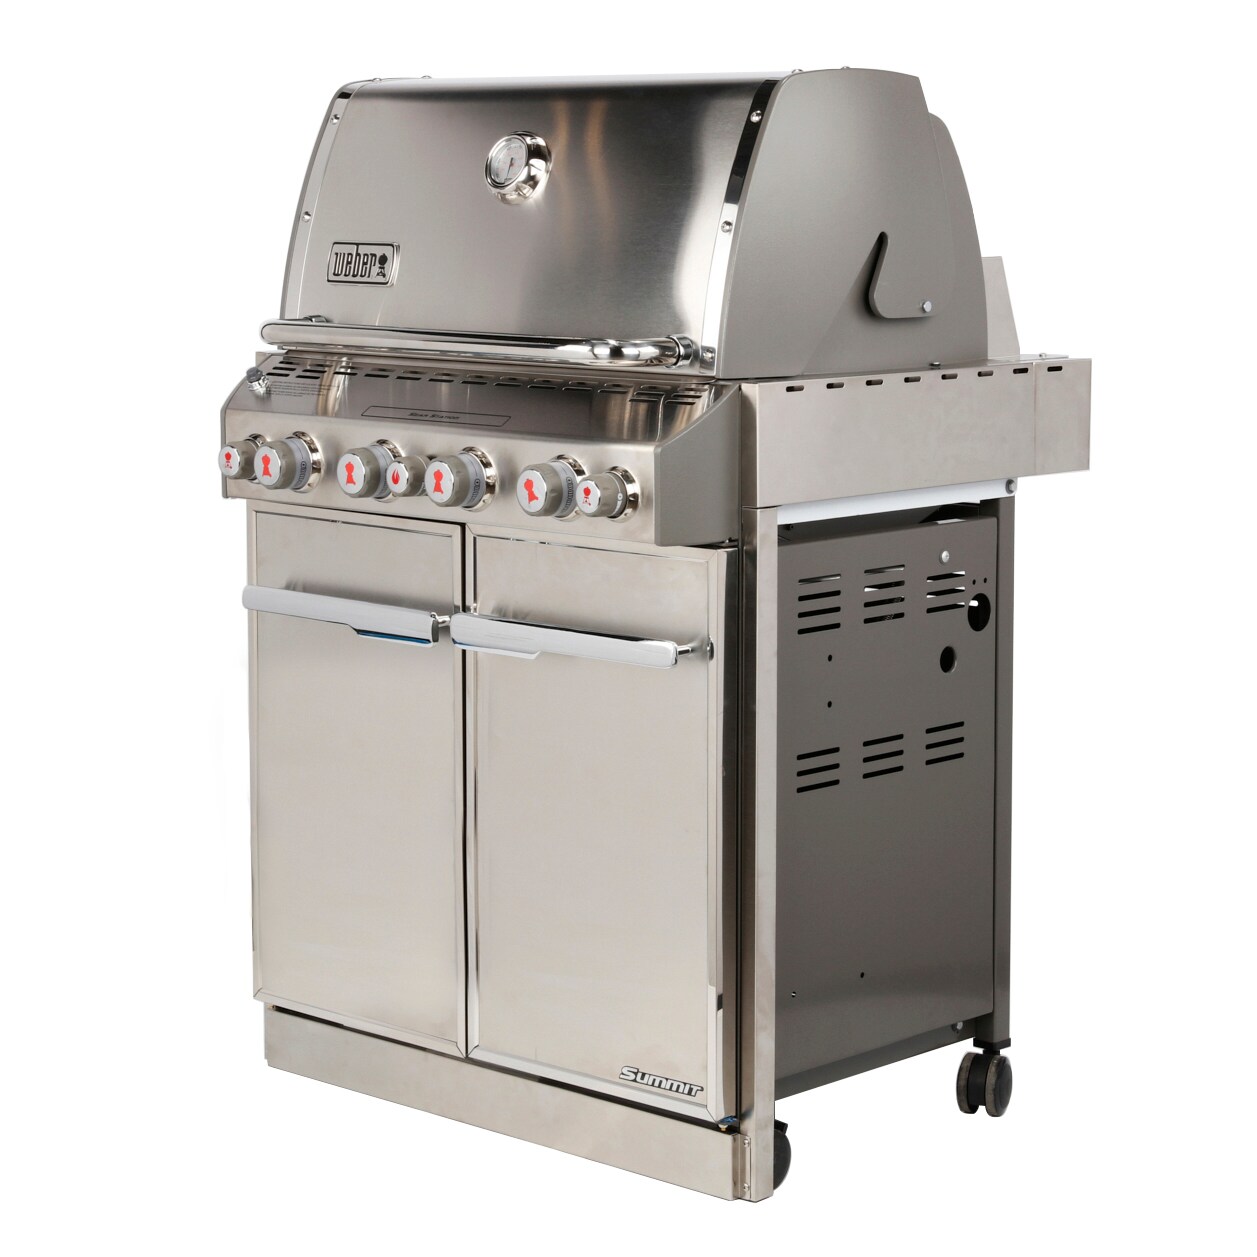 For Summit 600,625,650,675 Details about   Weber Stainless Steel 9921 